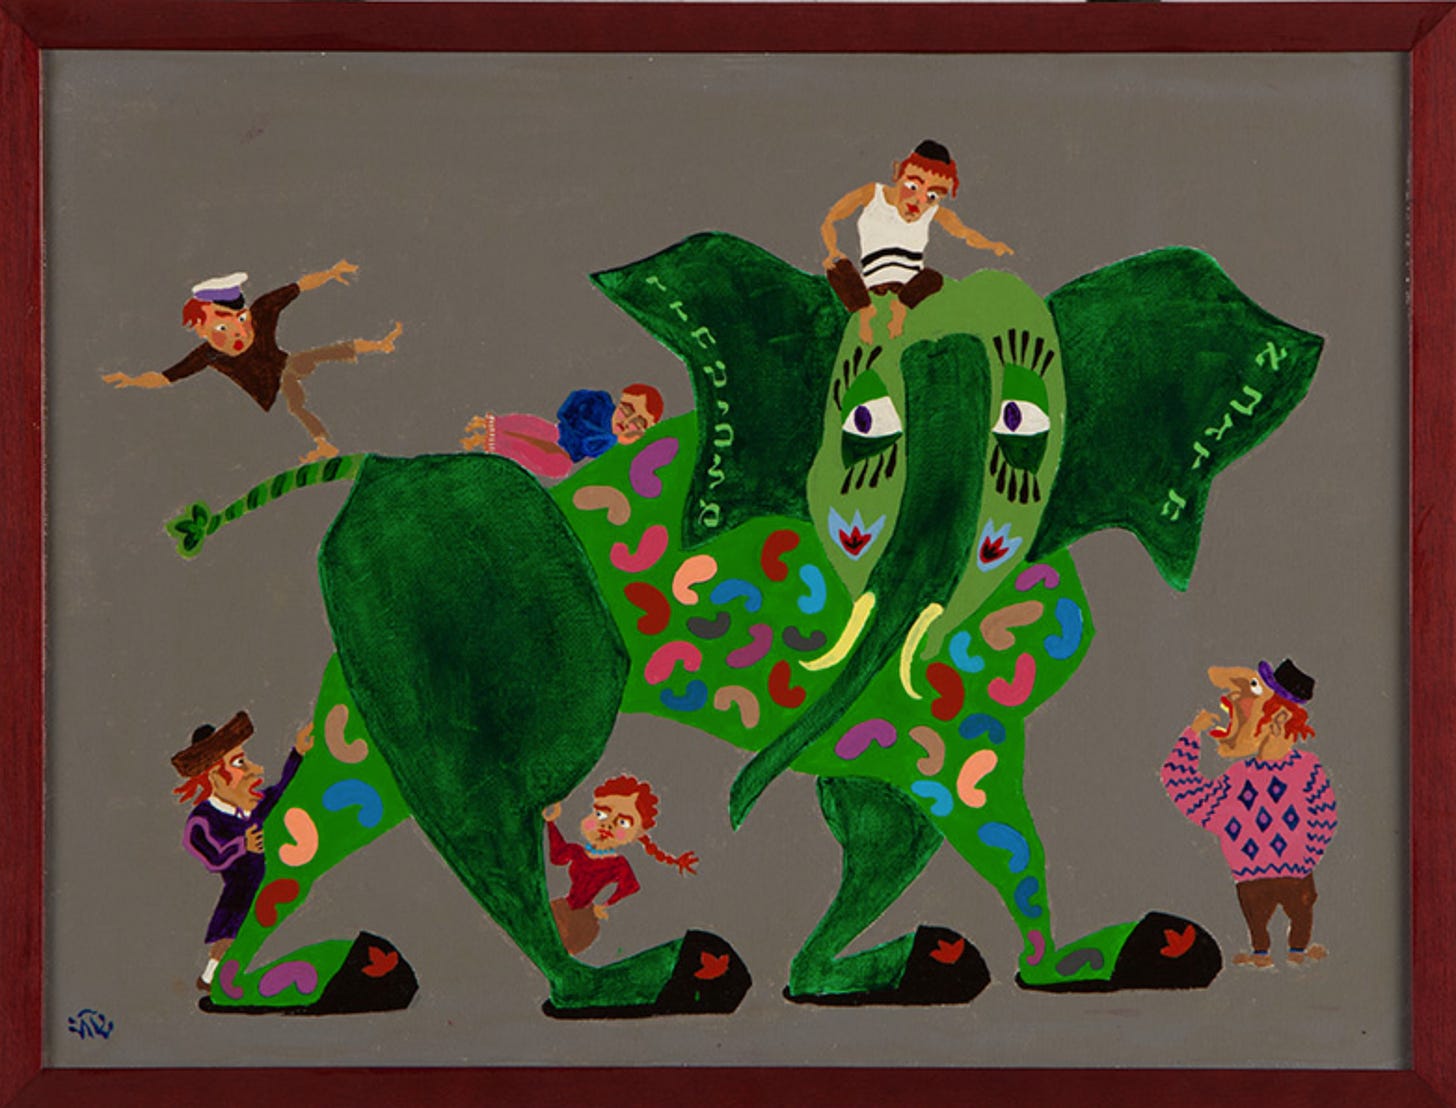 A green elephant with Hebrew on its ears and Jews in Hasidic garb playing on it